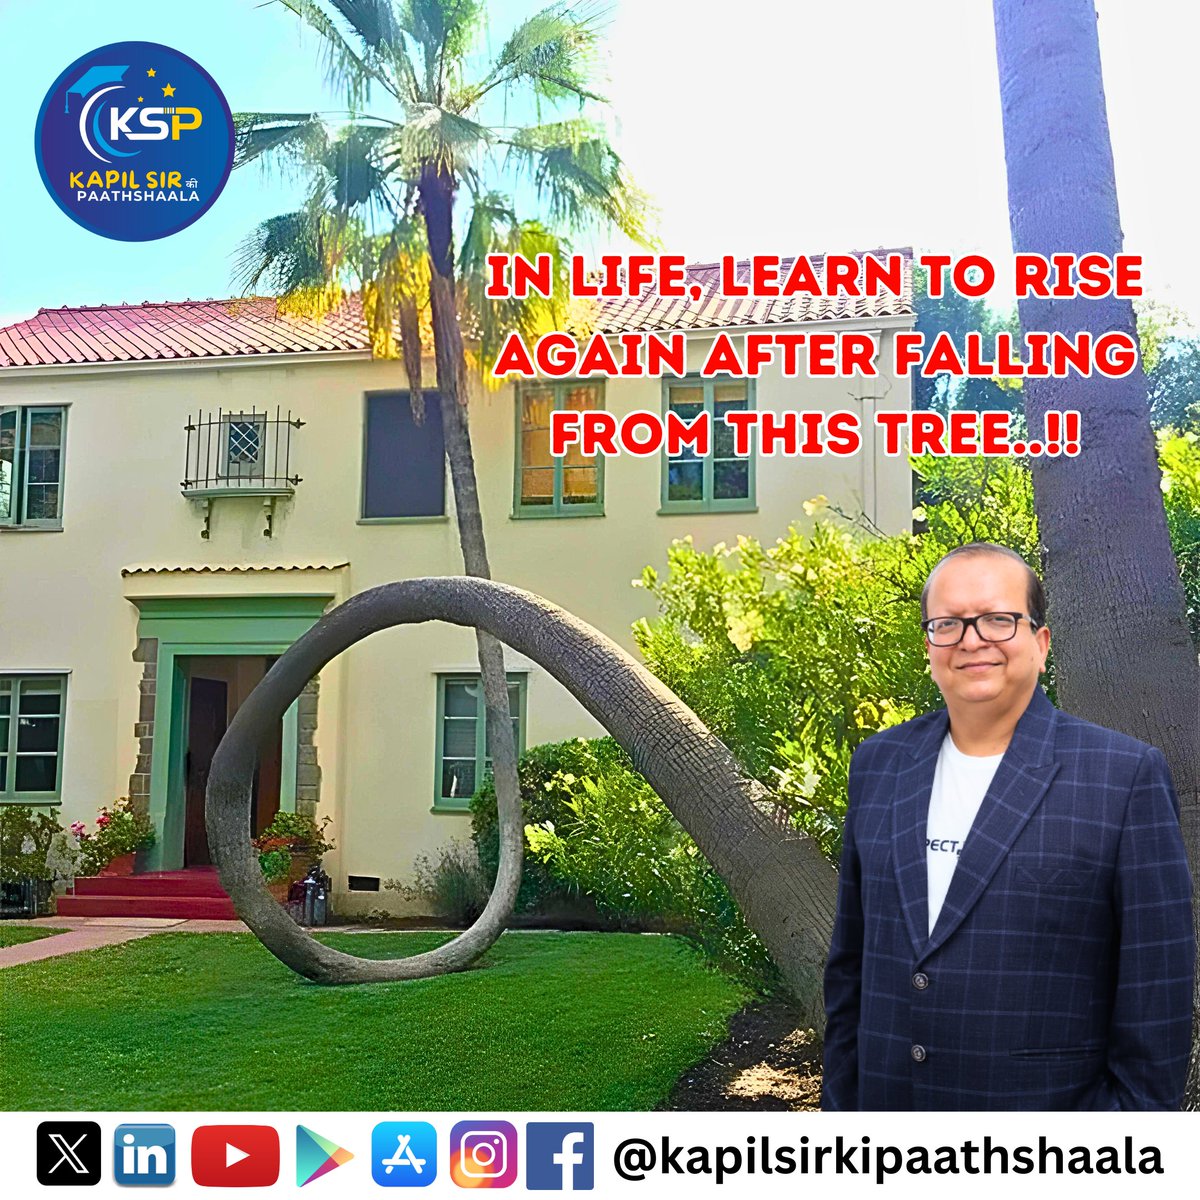 Life's greatest lesson: Learn to rise again after every fall, just like this tree..!! 🌳 
.
.
#NeverGiveUp #LifeLessons #NatureInspires #Motivation #StayFocused #BelieveInYourself #kapilsirkipaathshaala #kapilbatra #dailymotivation #lifelessons #kapilsirmotivation #successquotes